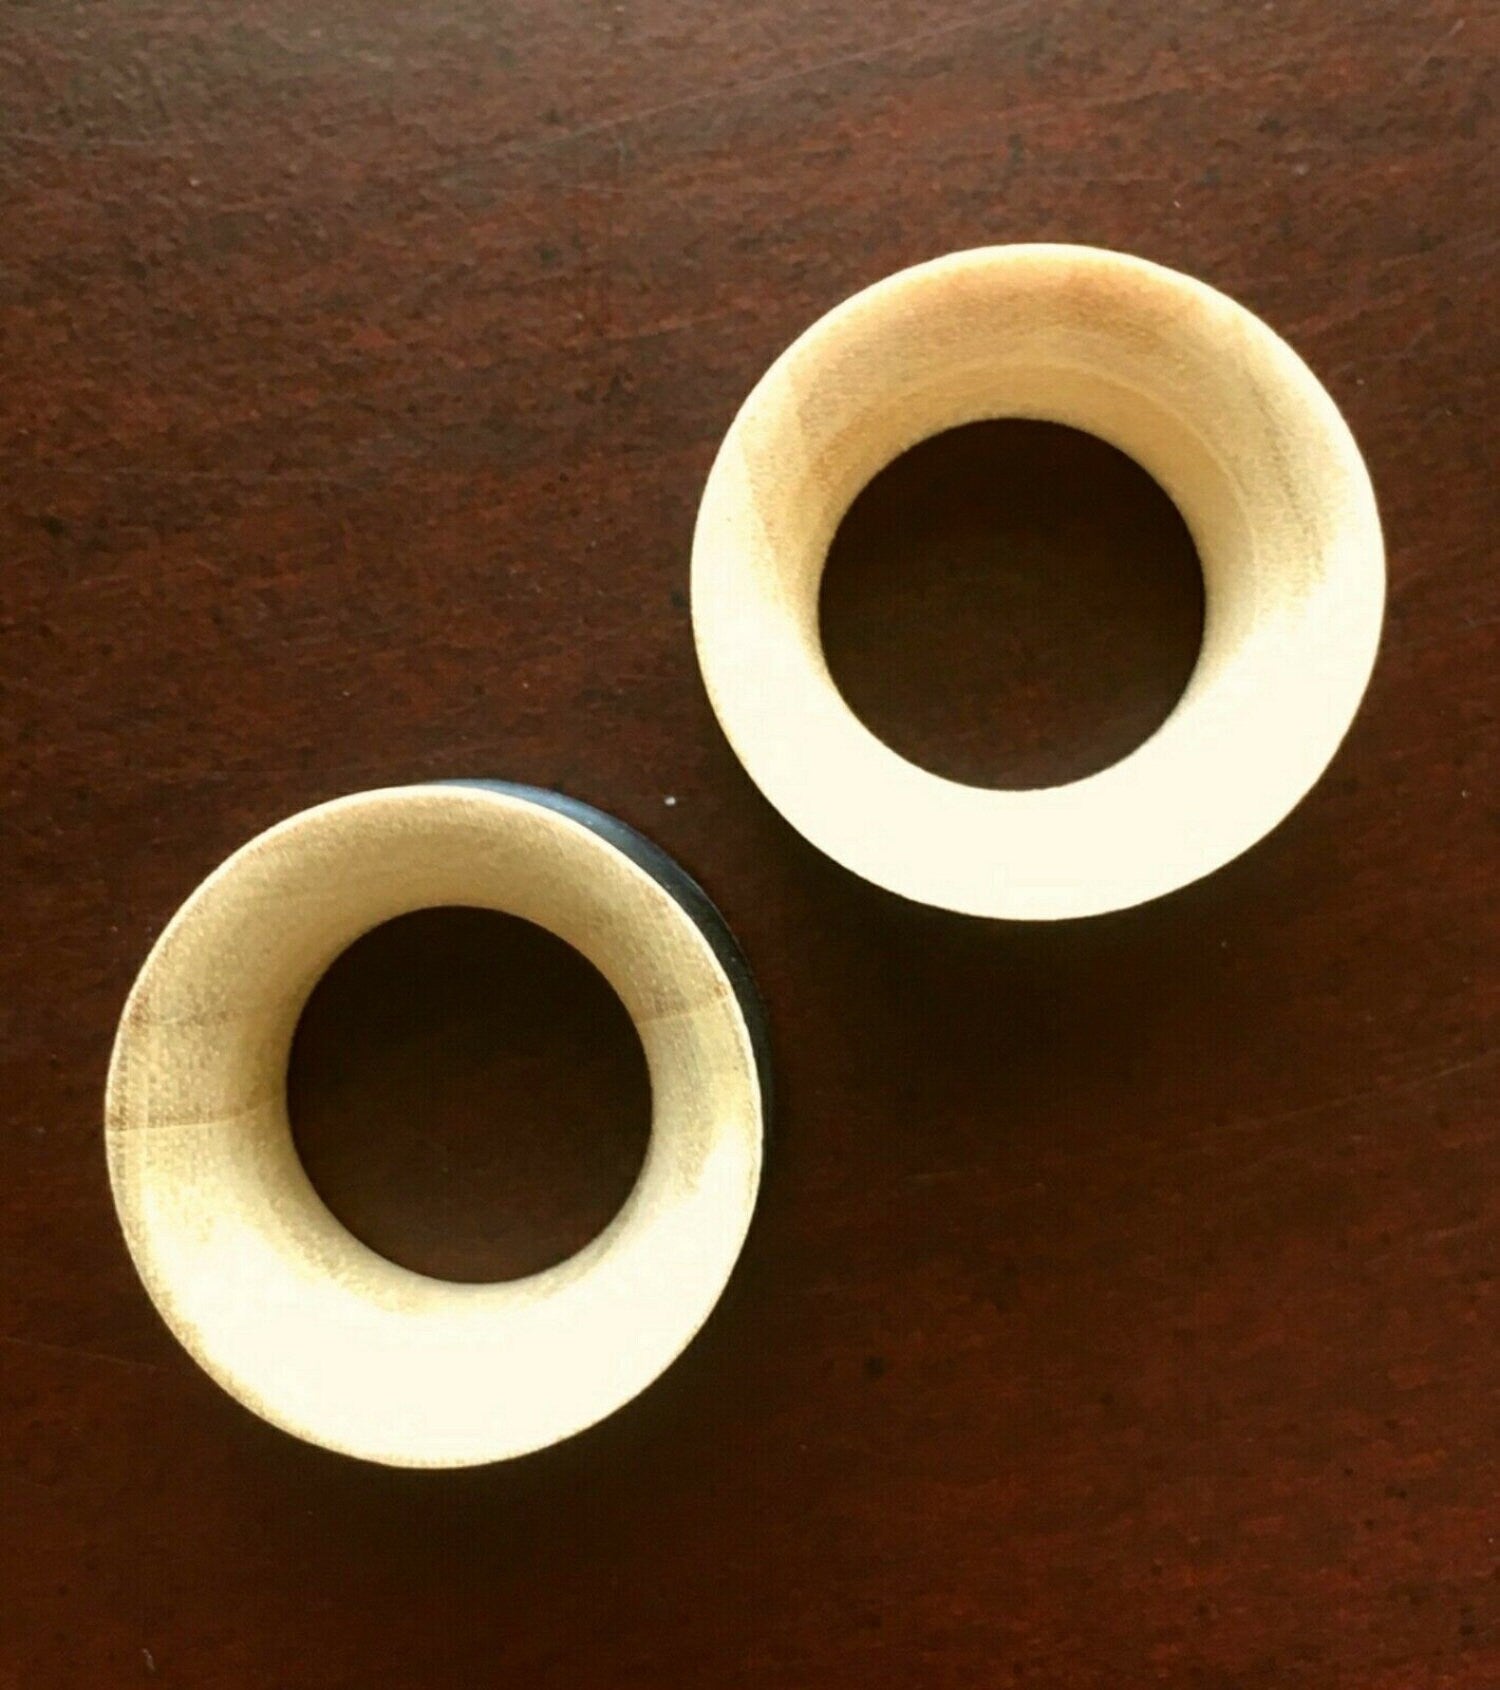 PAIR of Stunning Organic Blonde Crocodile Wood Single Flare Tunnels / Plugs with O-Rings - Gauges 8g (3.2mm) up to 13/16" (20mm) available!